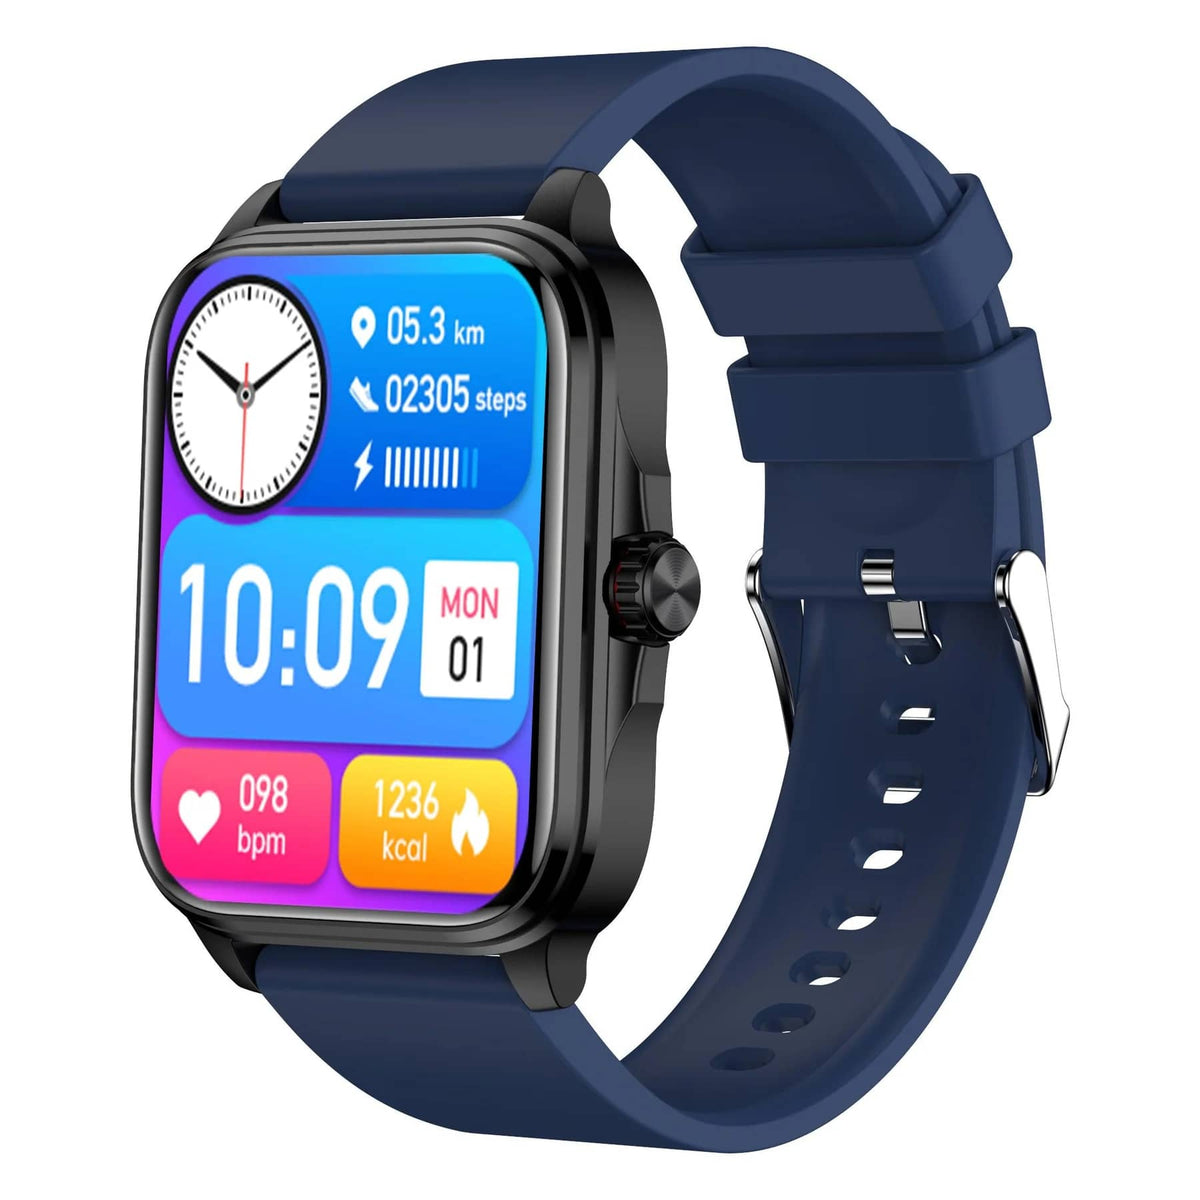 PH90 Large 1.91-inch Full-touch Screen Non-invasive Blood Glucose Fashion Health Smart Watch